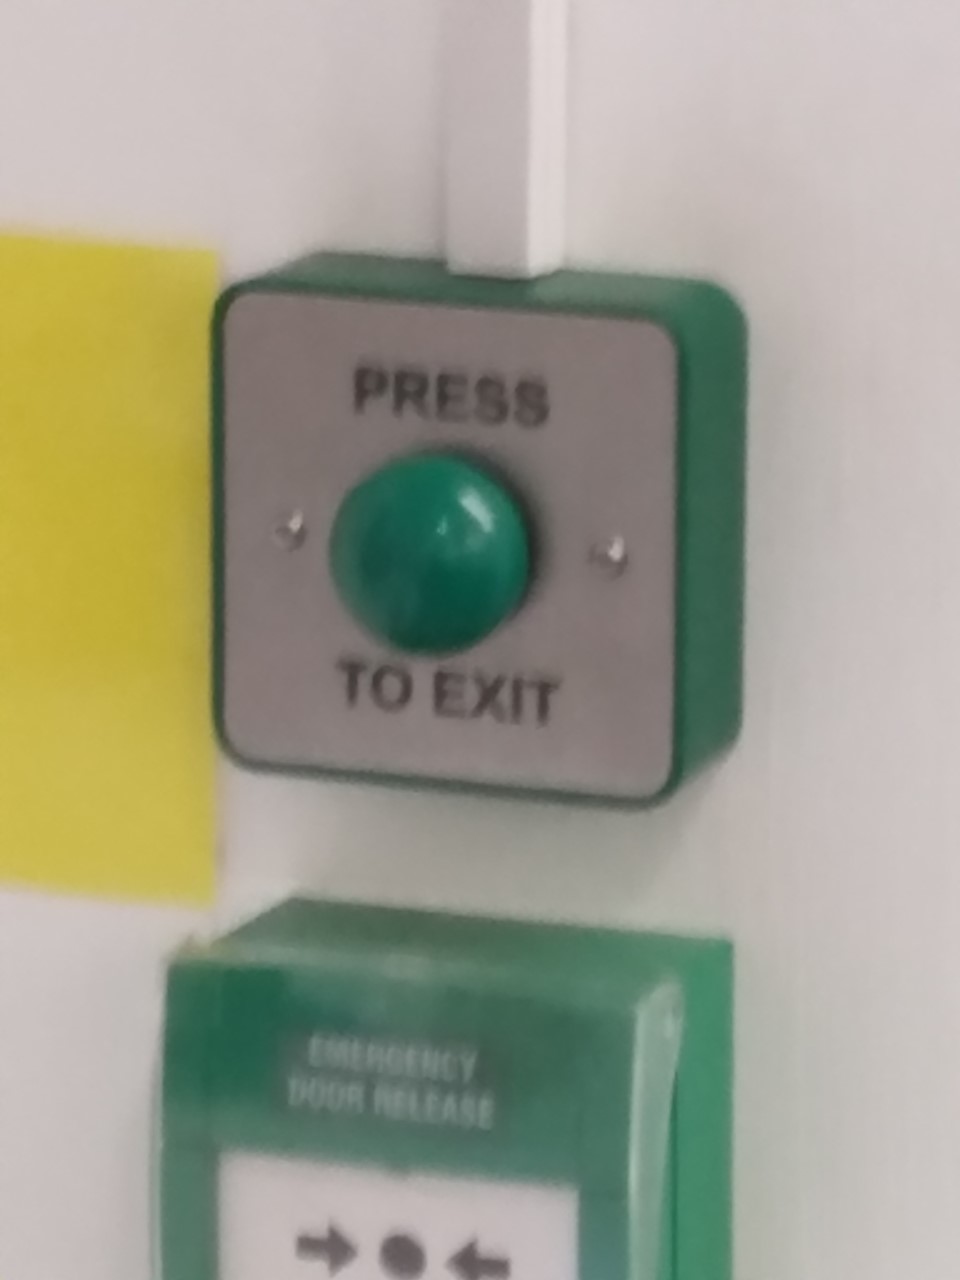 Exit button to leave the waiting area